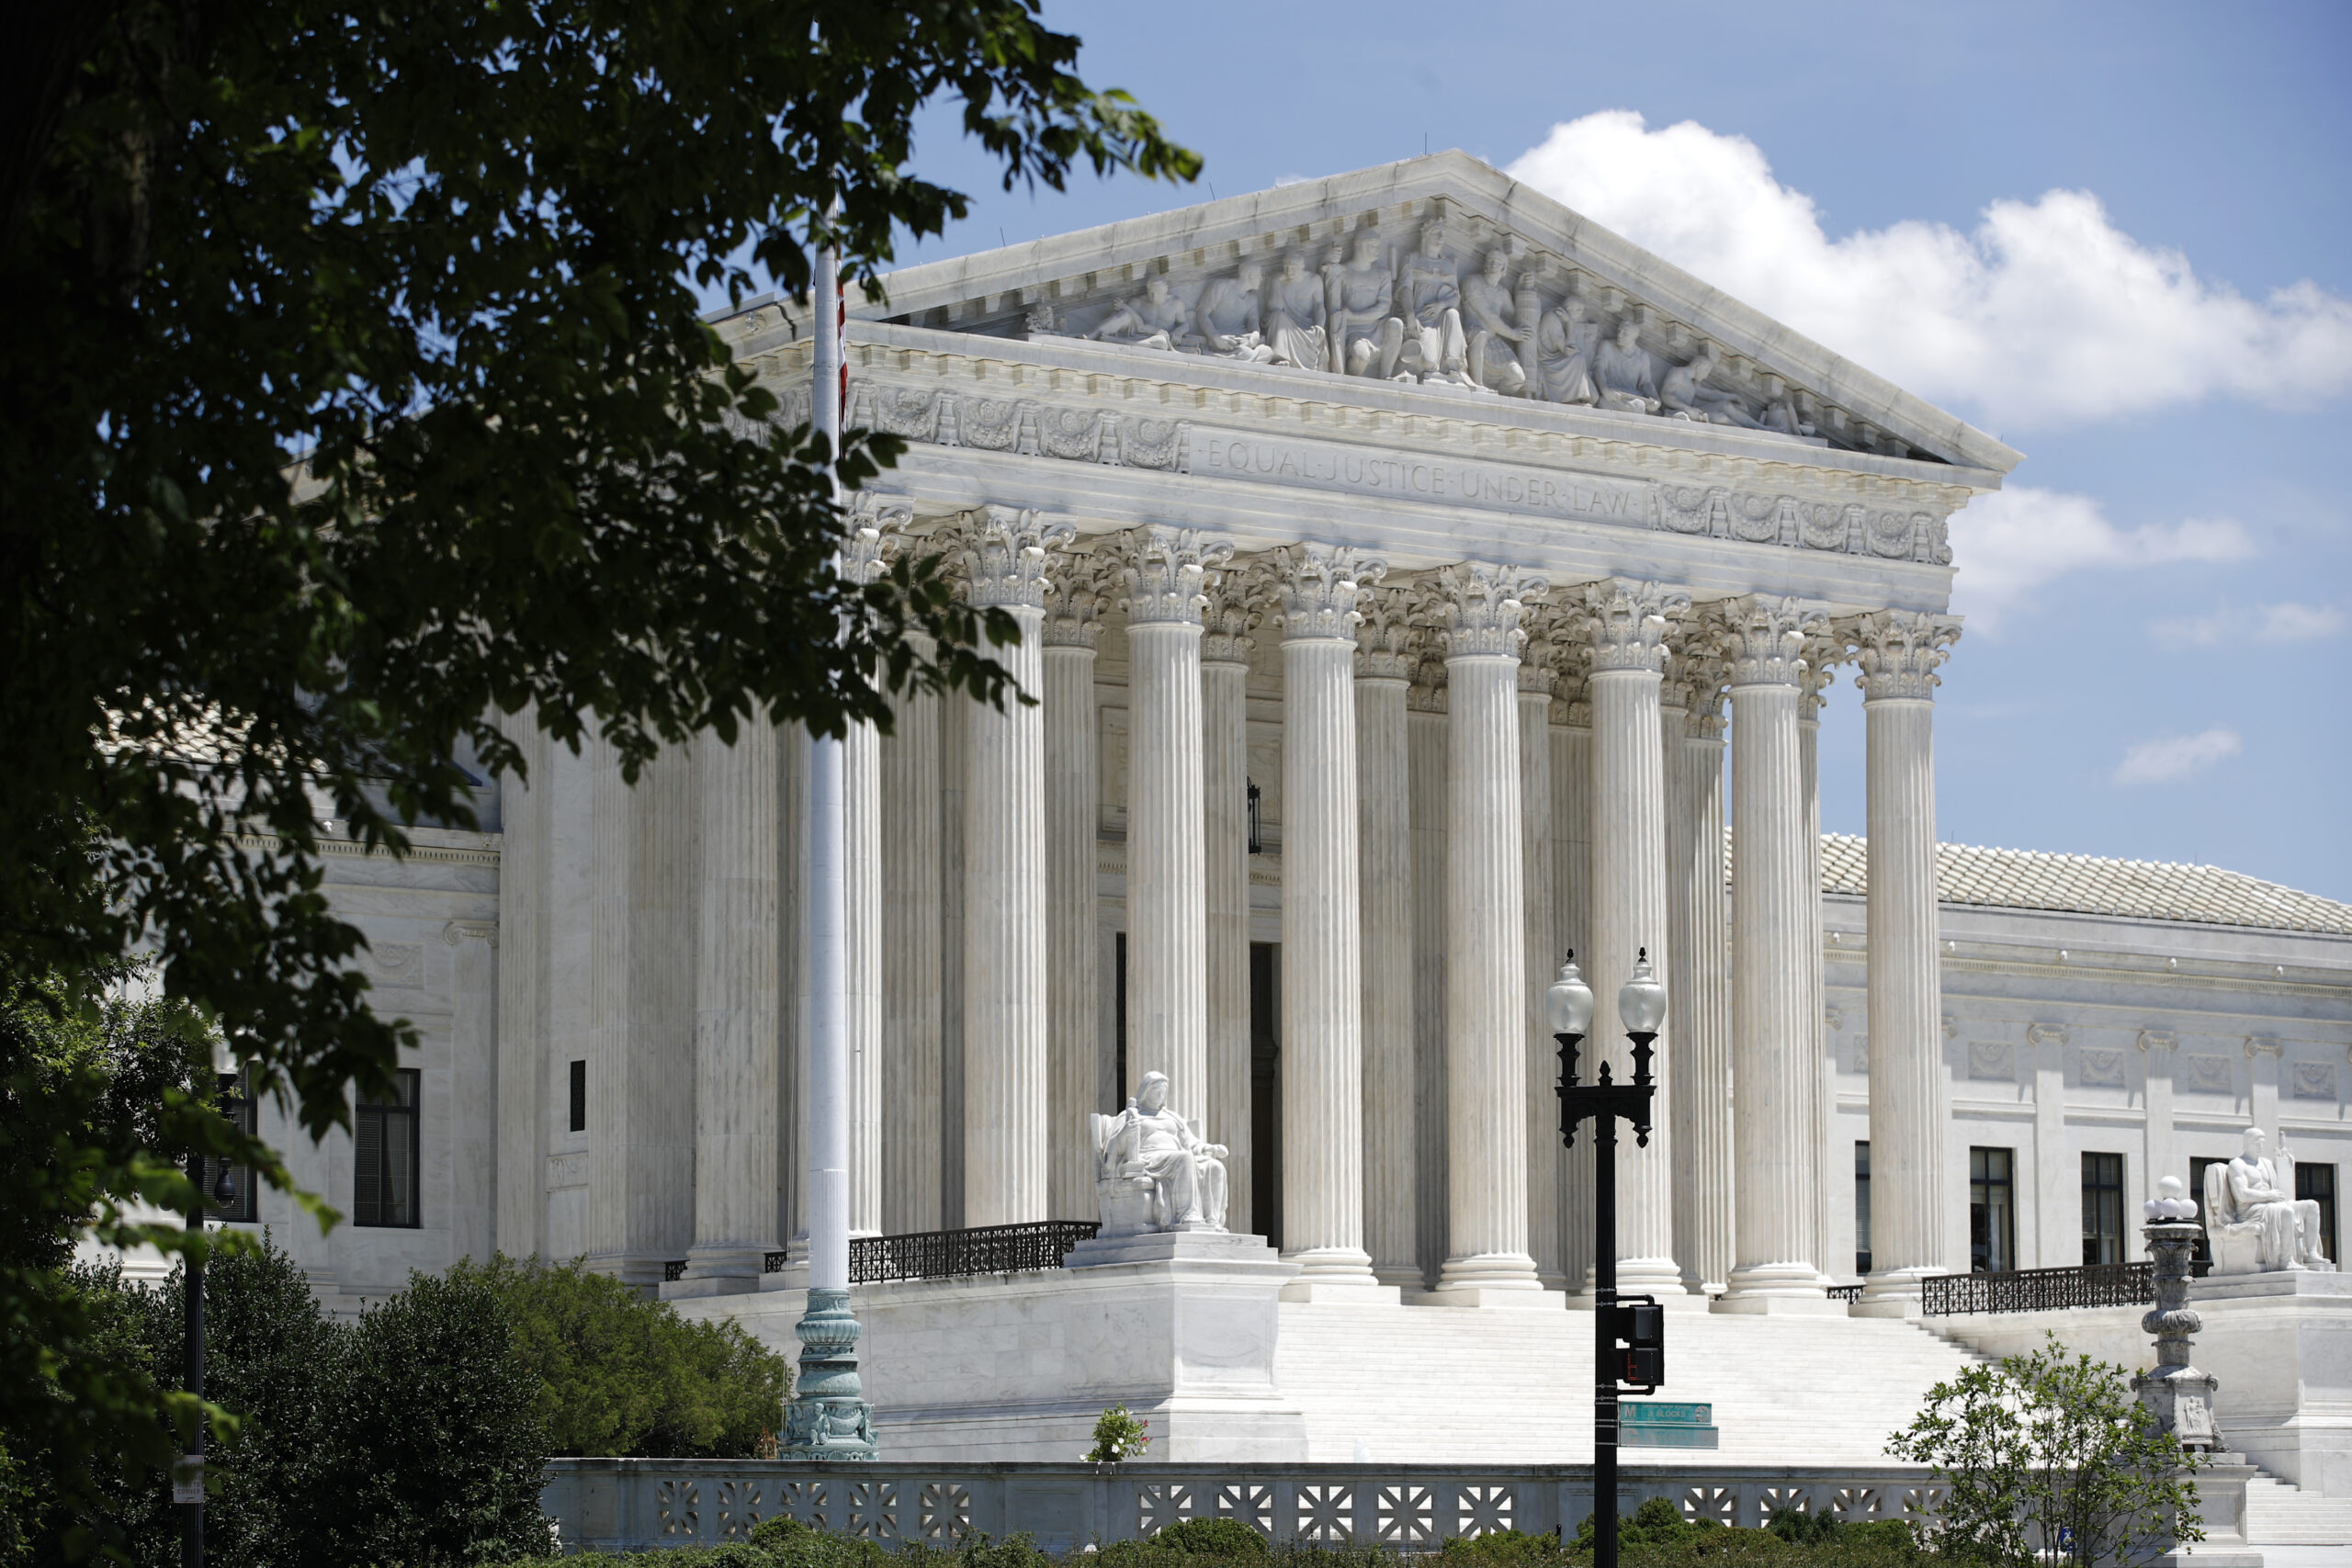 In this June 29, 2020 file photo, the Supreme Court is seen on Capitol Hill in Washington. (AP Photo/Patrick Semansky)